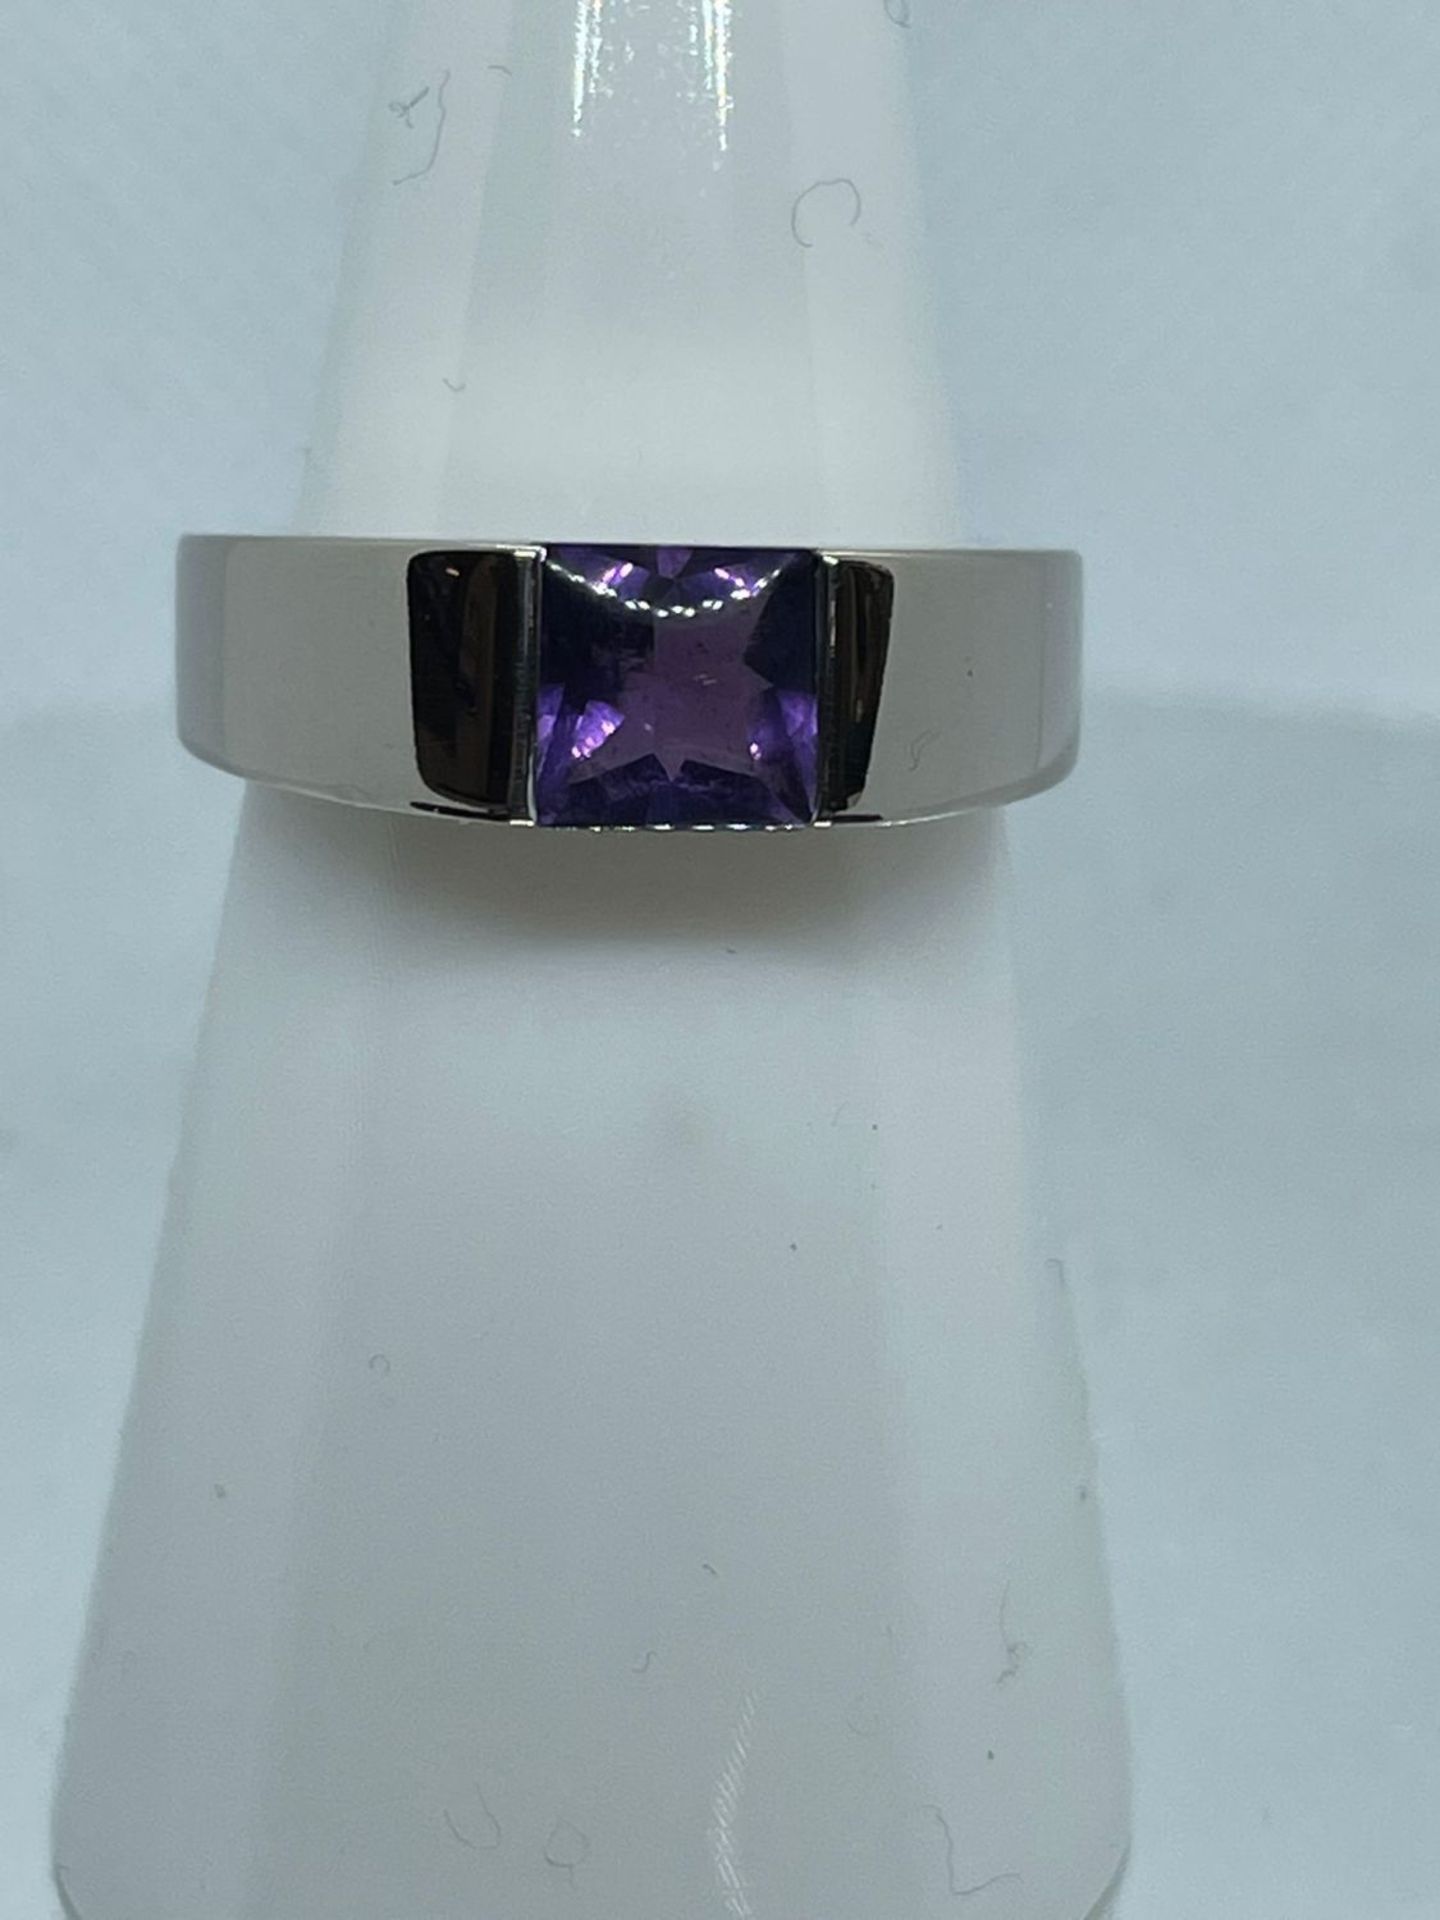 CARTIER - 18K WHITE GOLD / AMETHYST RING WITH BOX & CERTIFICATE - Image 4 of 5